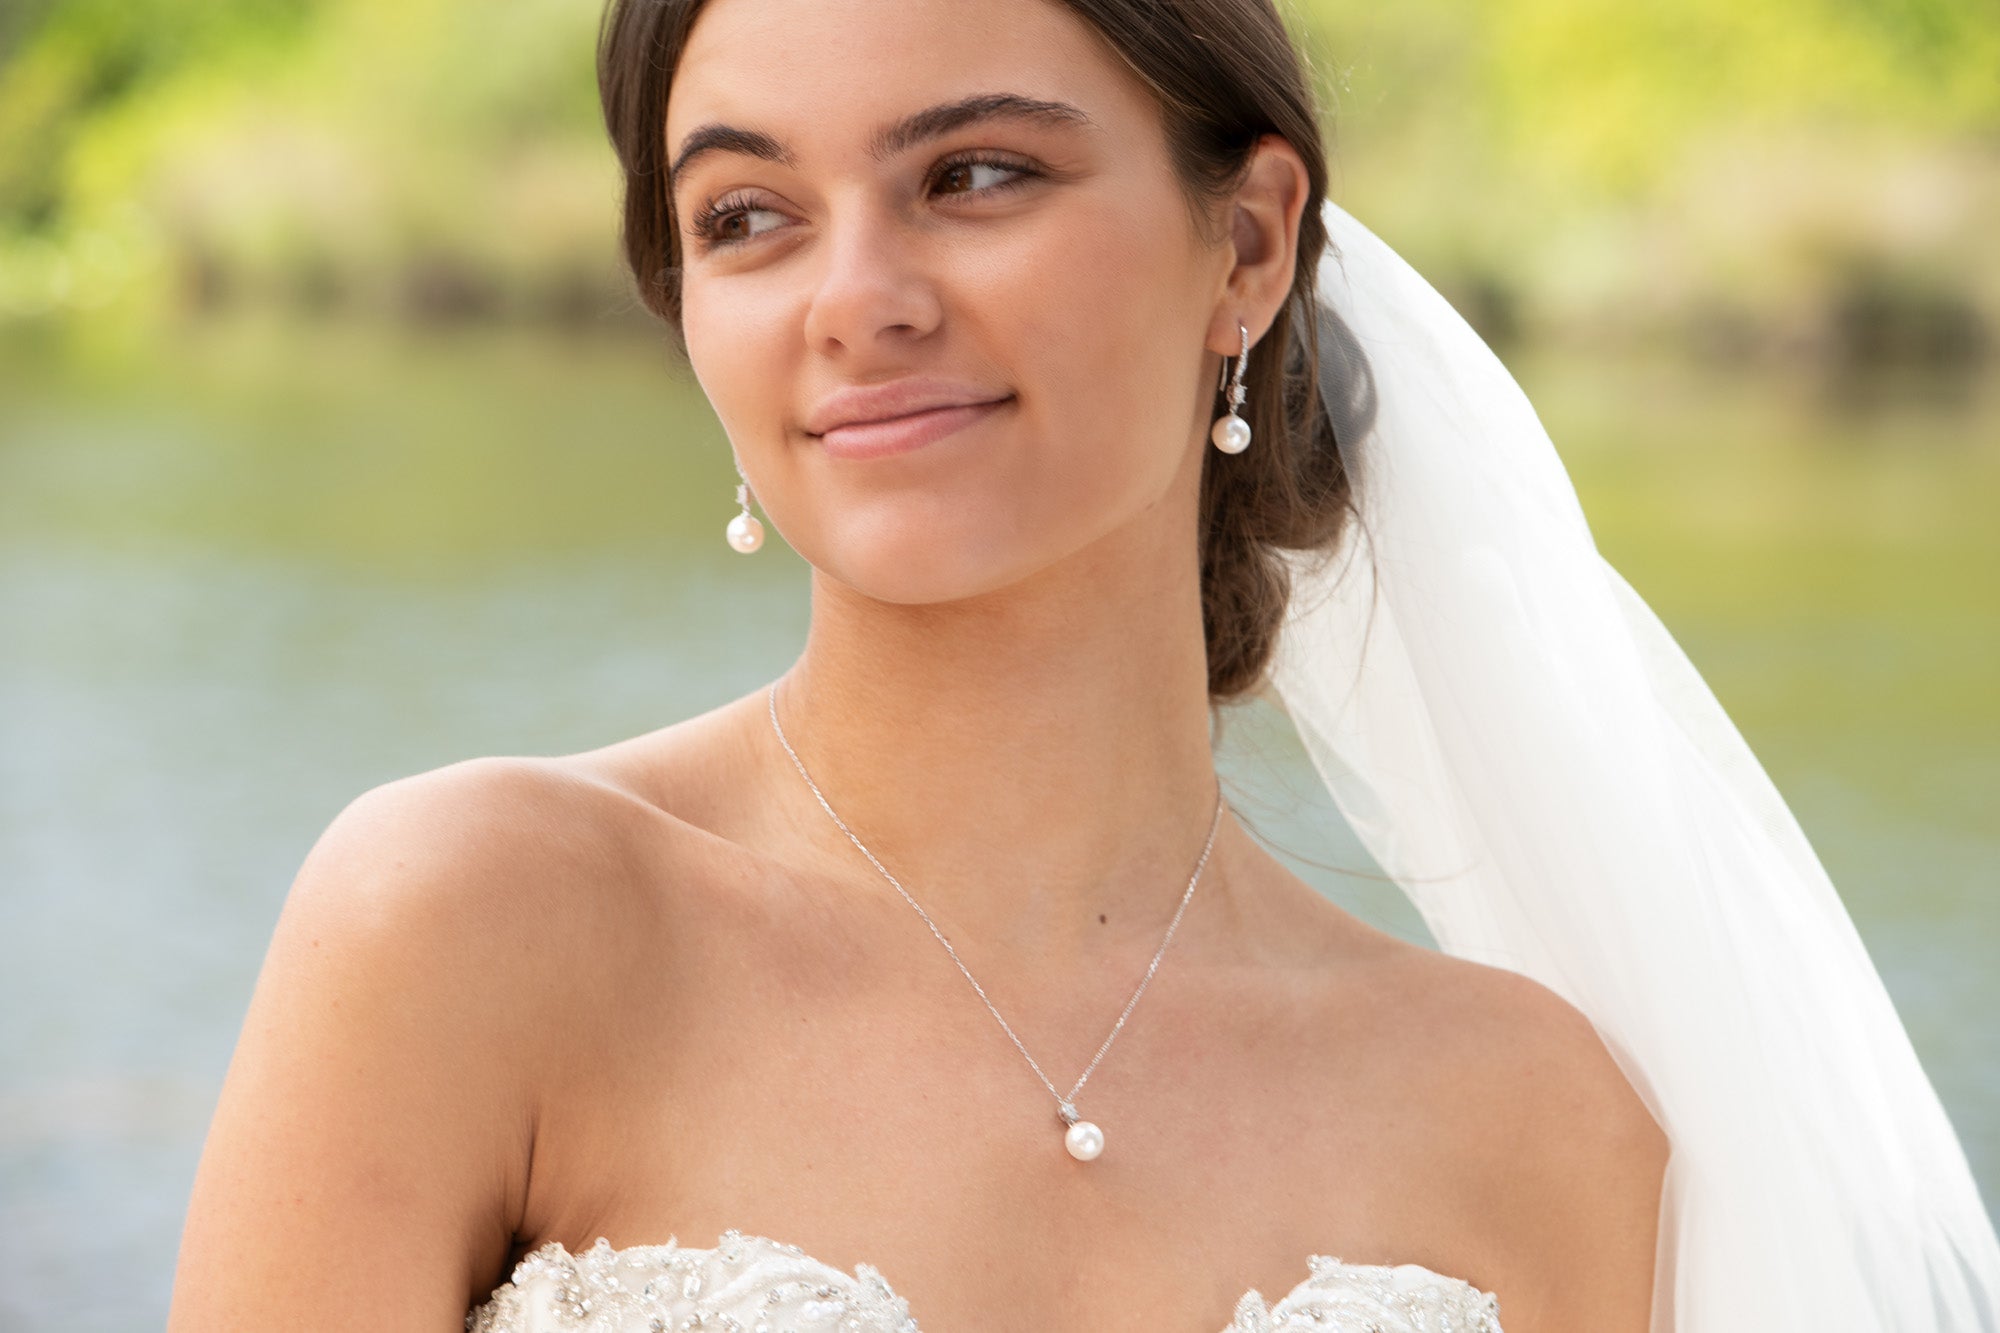 How to Find Affordable Bridal Jewellery